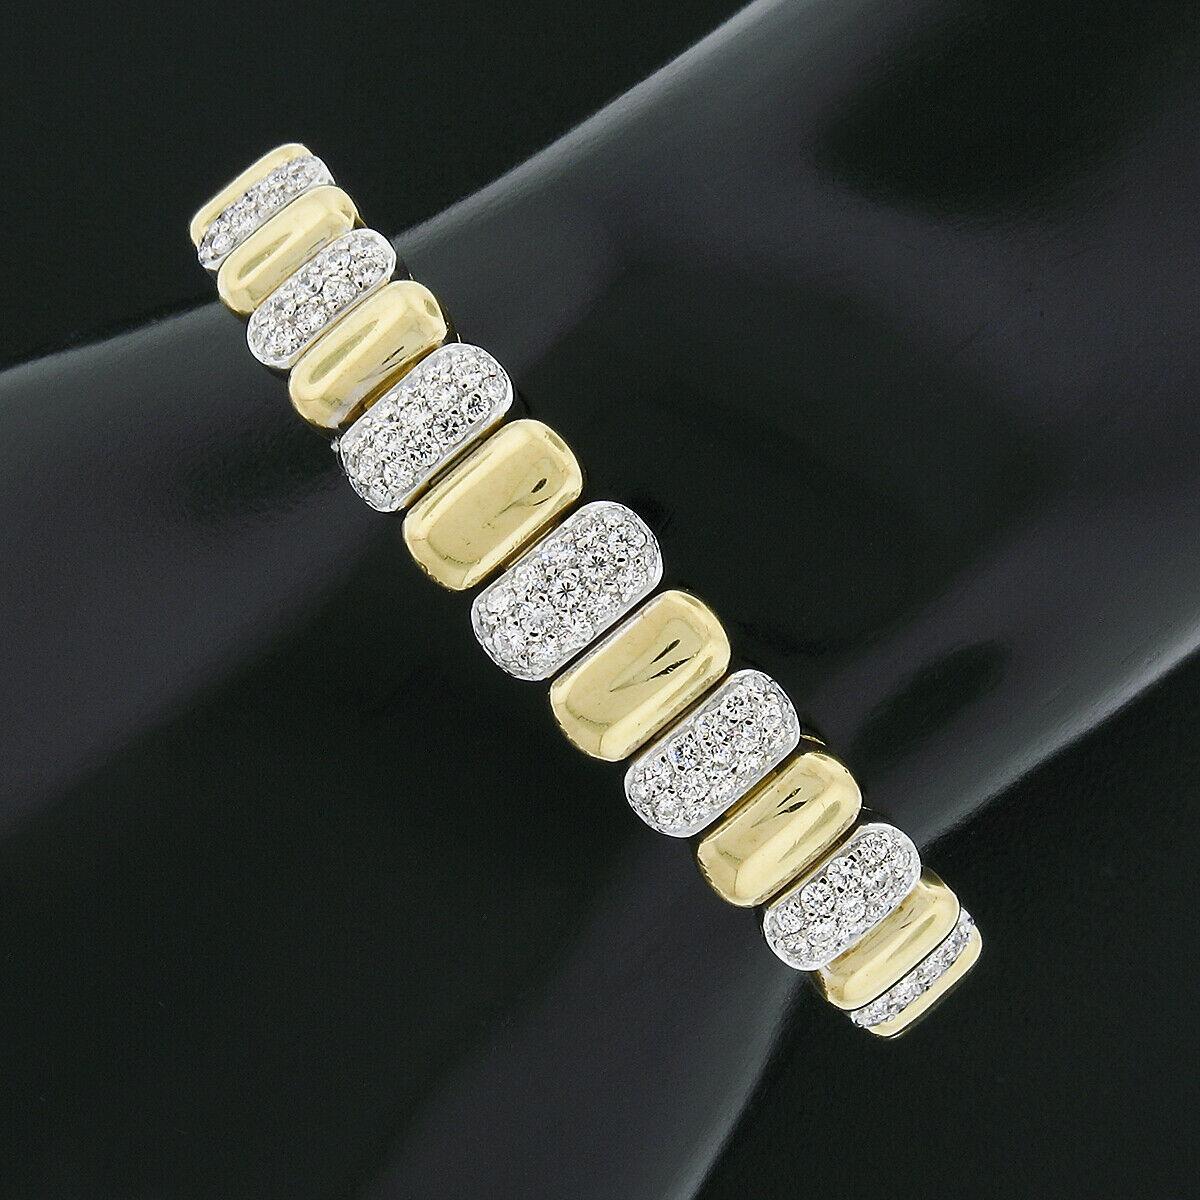 Here we have an absolutely gorgeous vintage bracelet crafted in 18k solid yellow and white gold. It features an elegant design constructed from graduating oval links that have a nice high-polished finish throughout with 7 links neatly pave set with